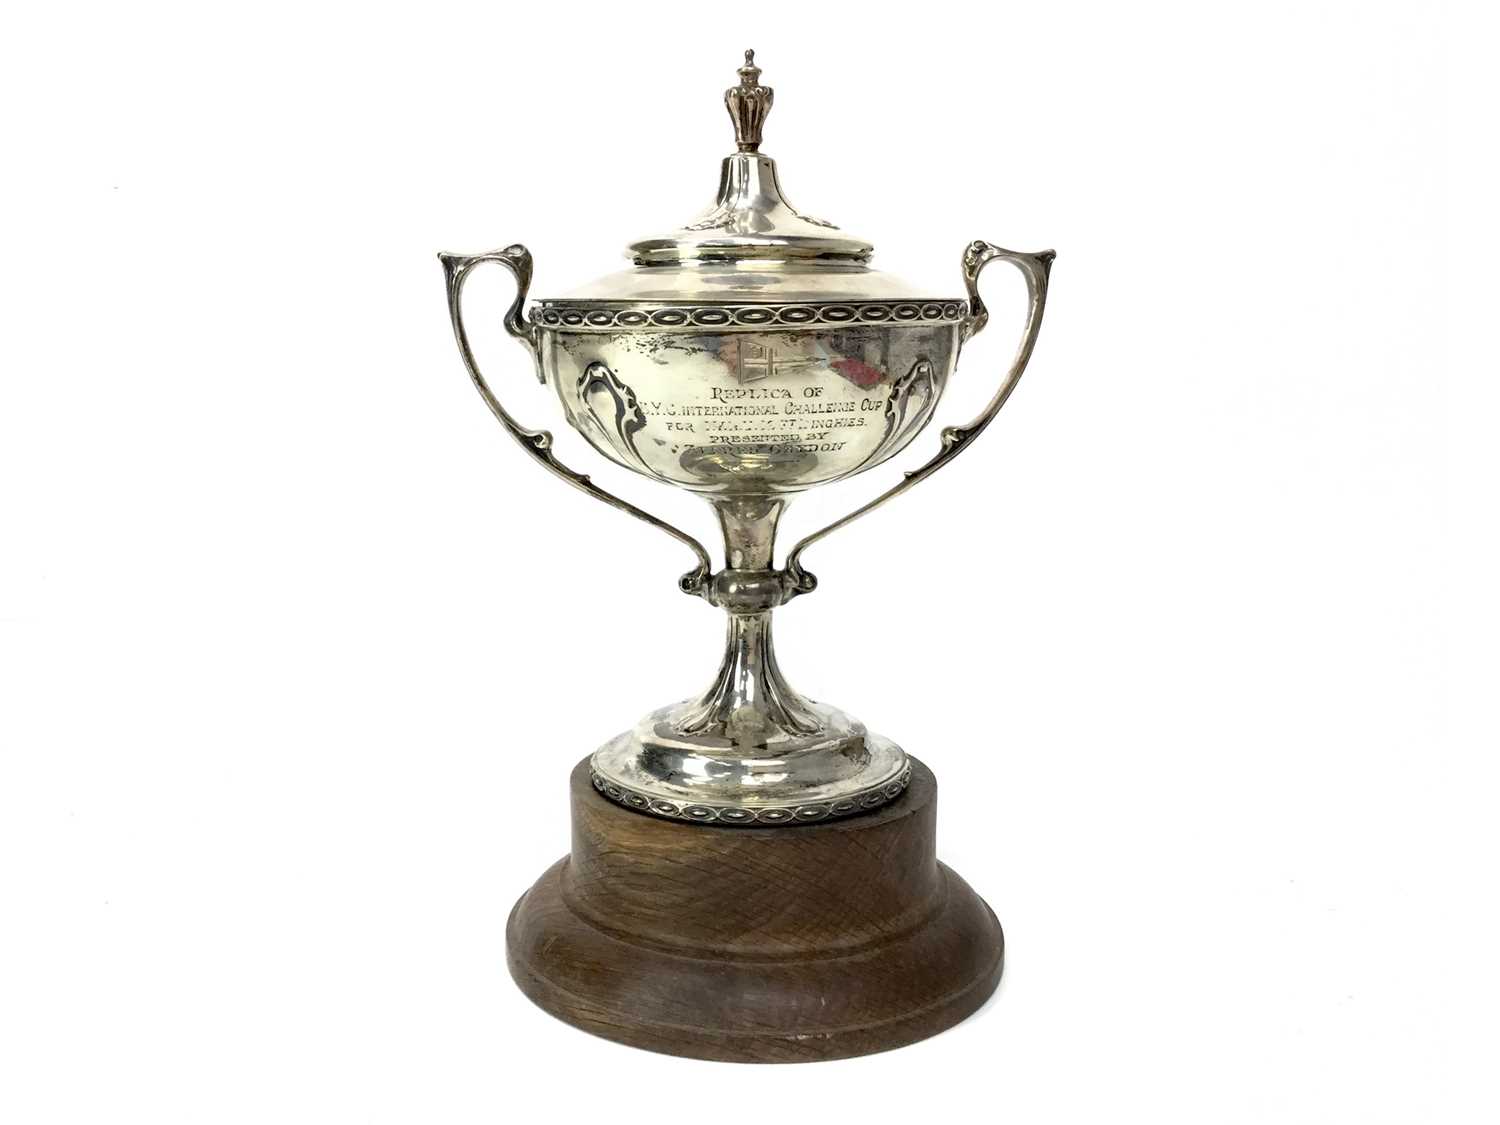 Lot 1712 - A SILVER TROPHY CUP AWARDED TO IWUNDA 1923